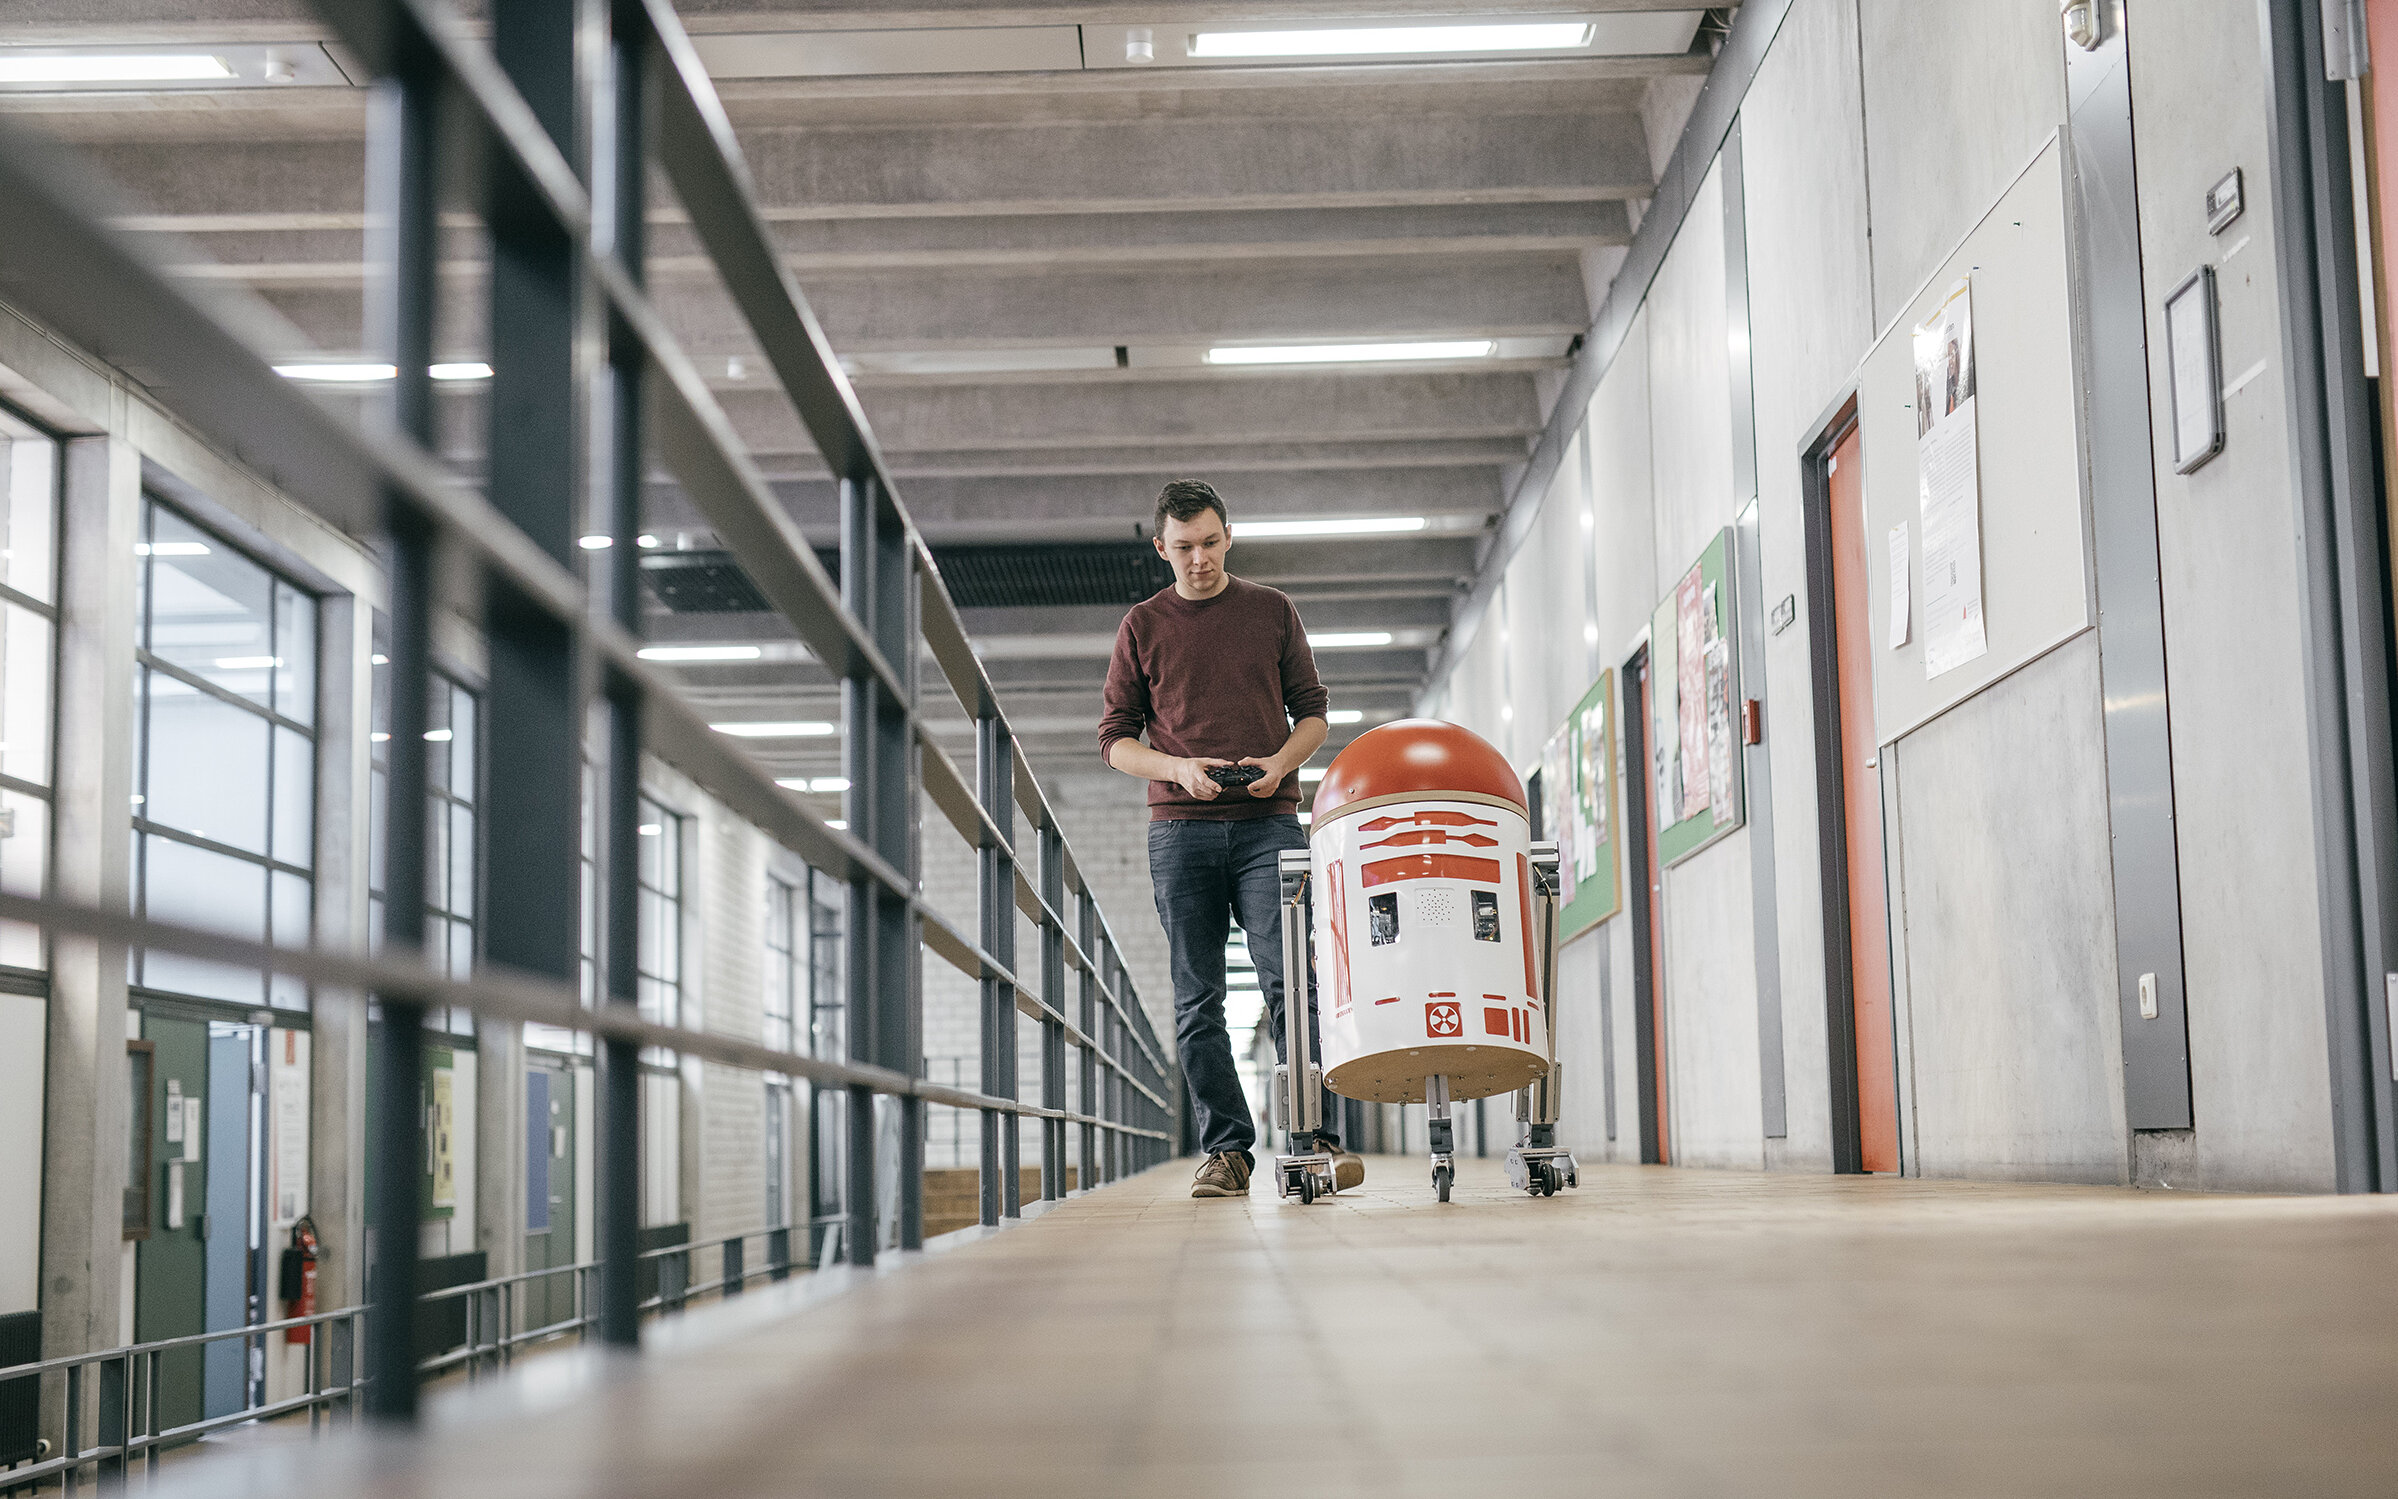 student moves a homemade robot by remote control along a hallway